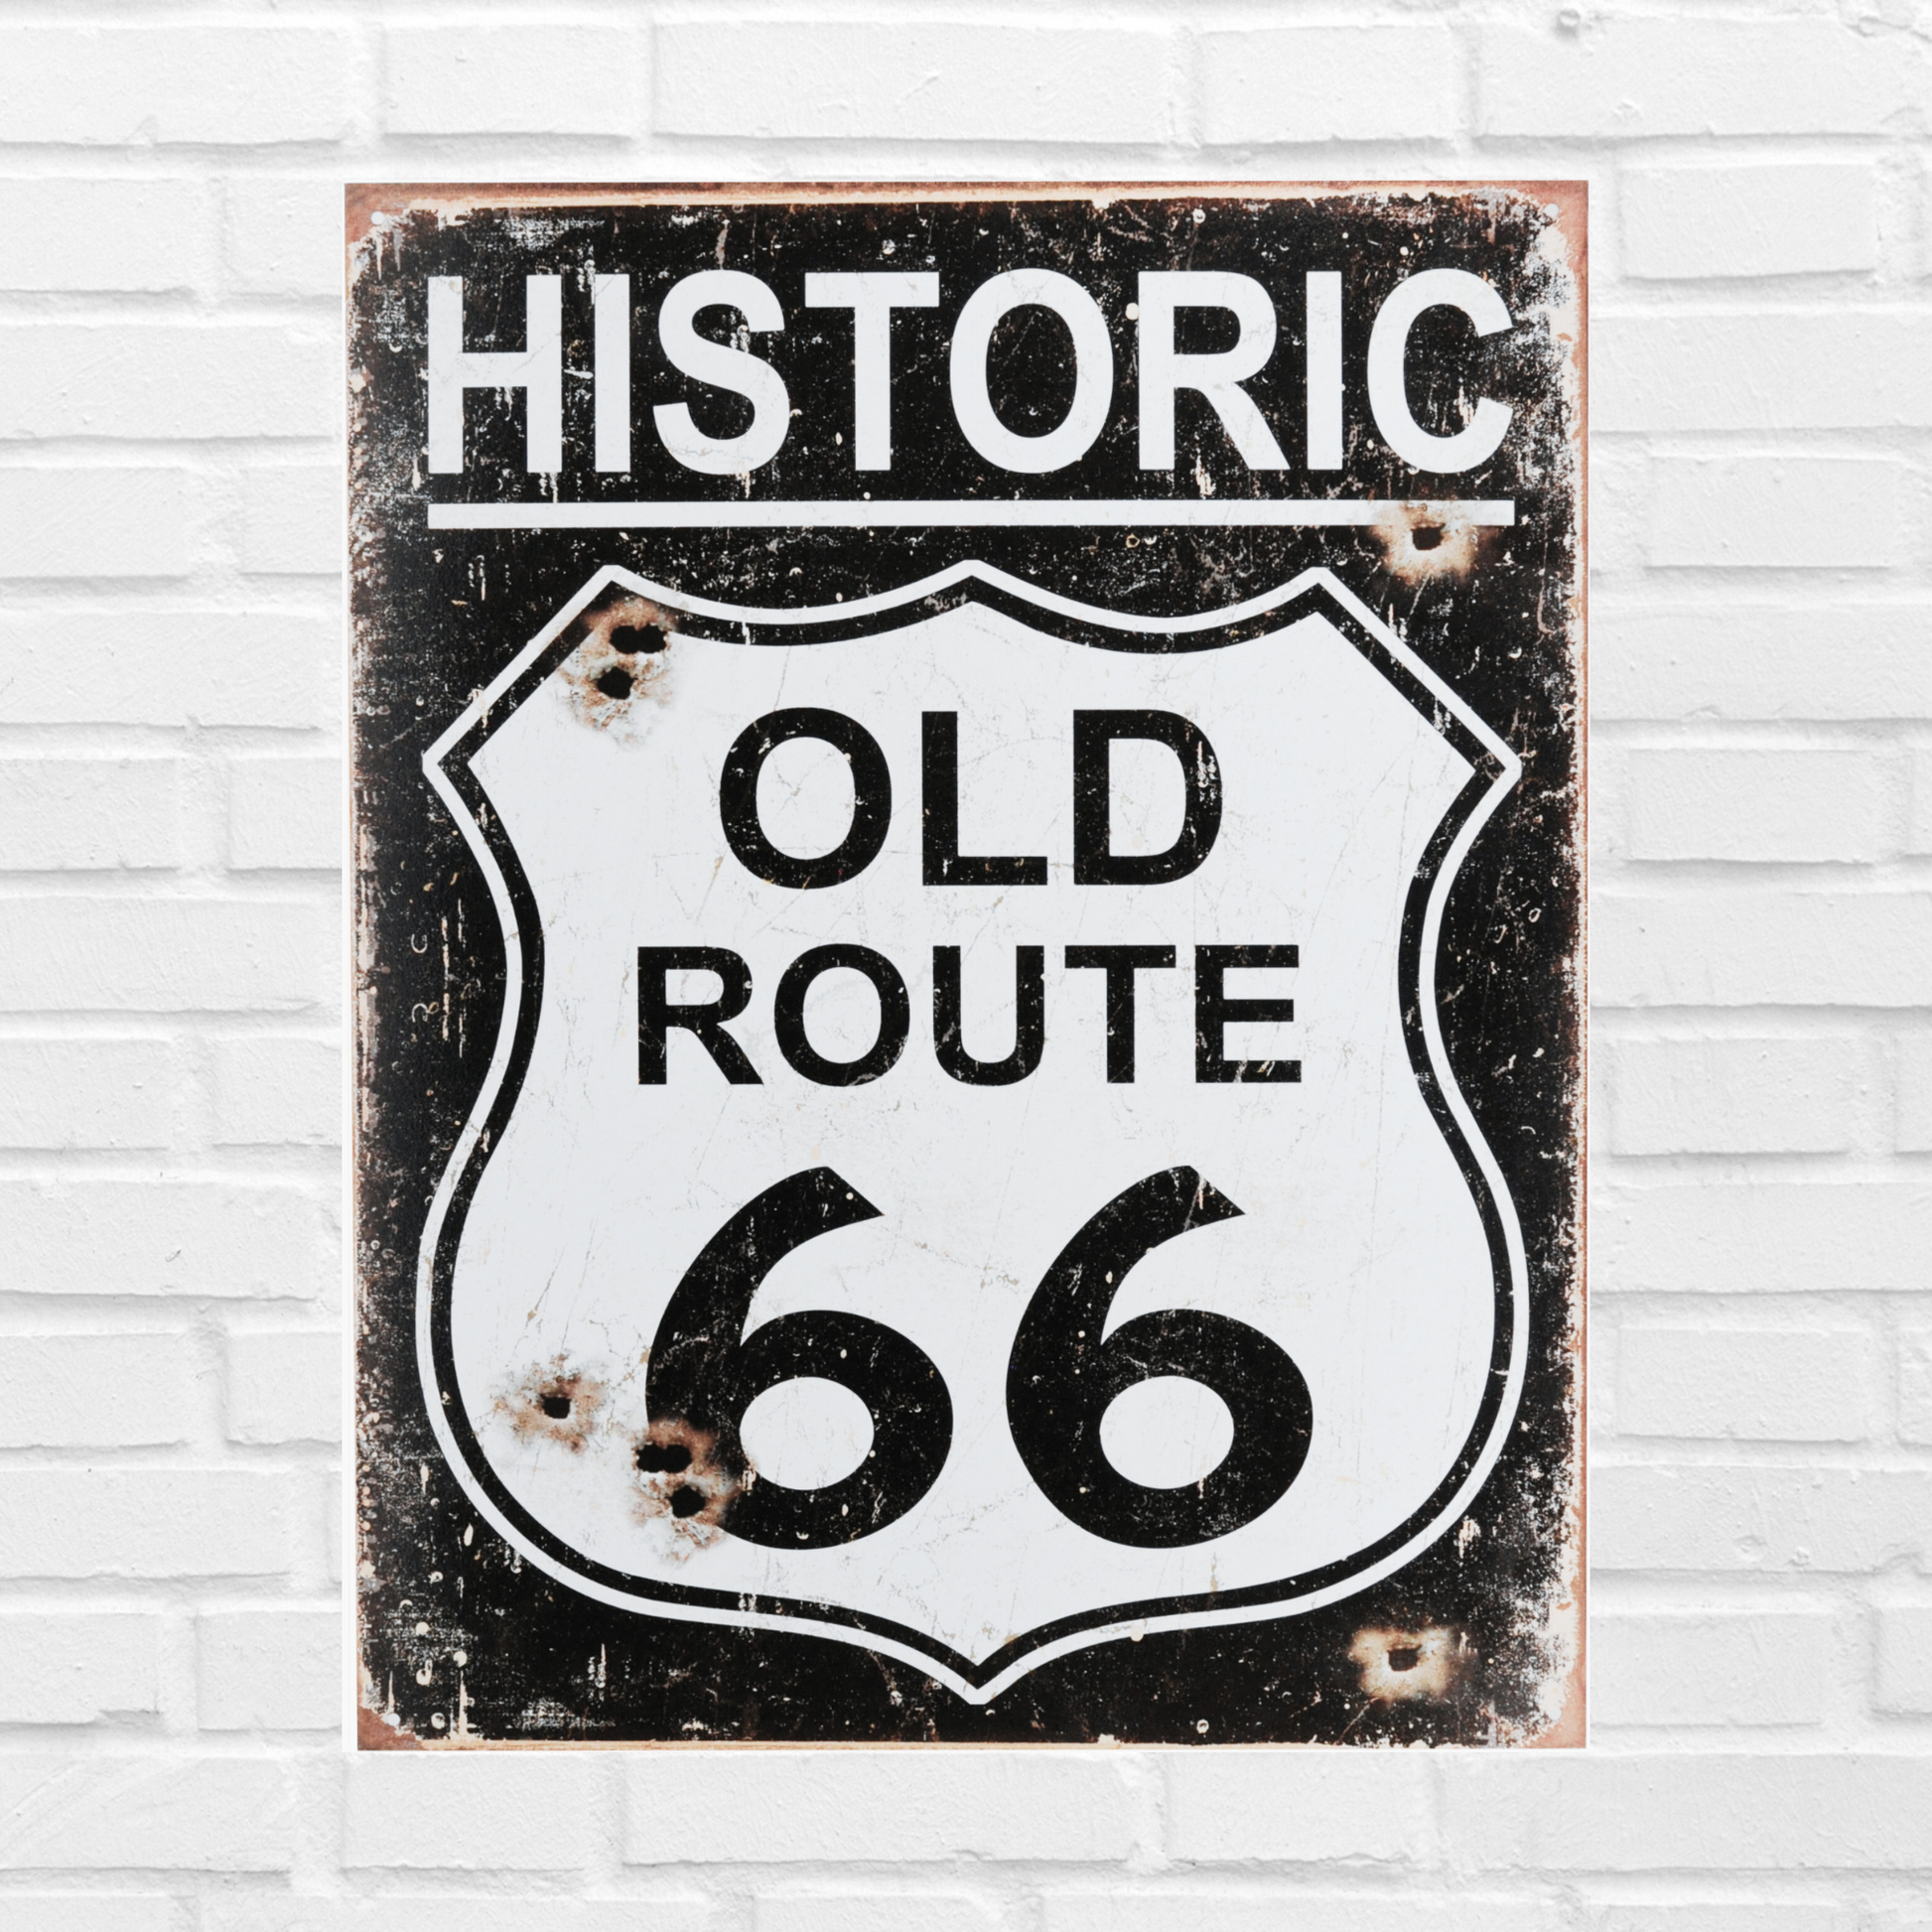 Vintage Poster that says "Historic Old Route 66" with rusty distressed look.